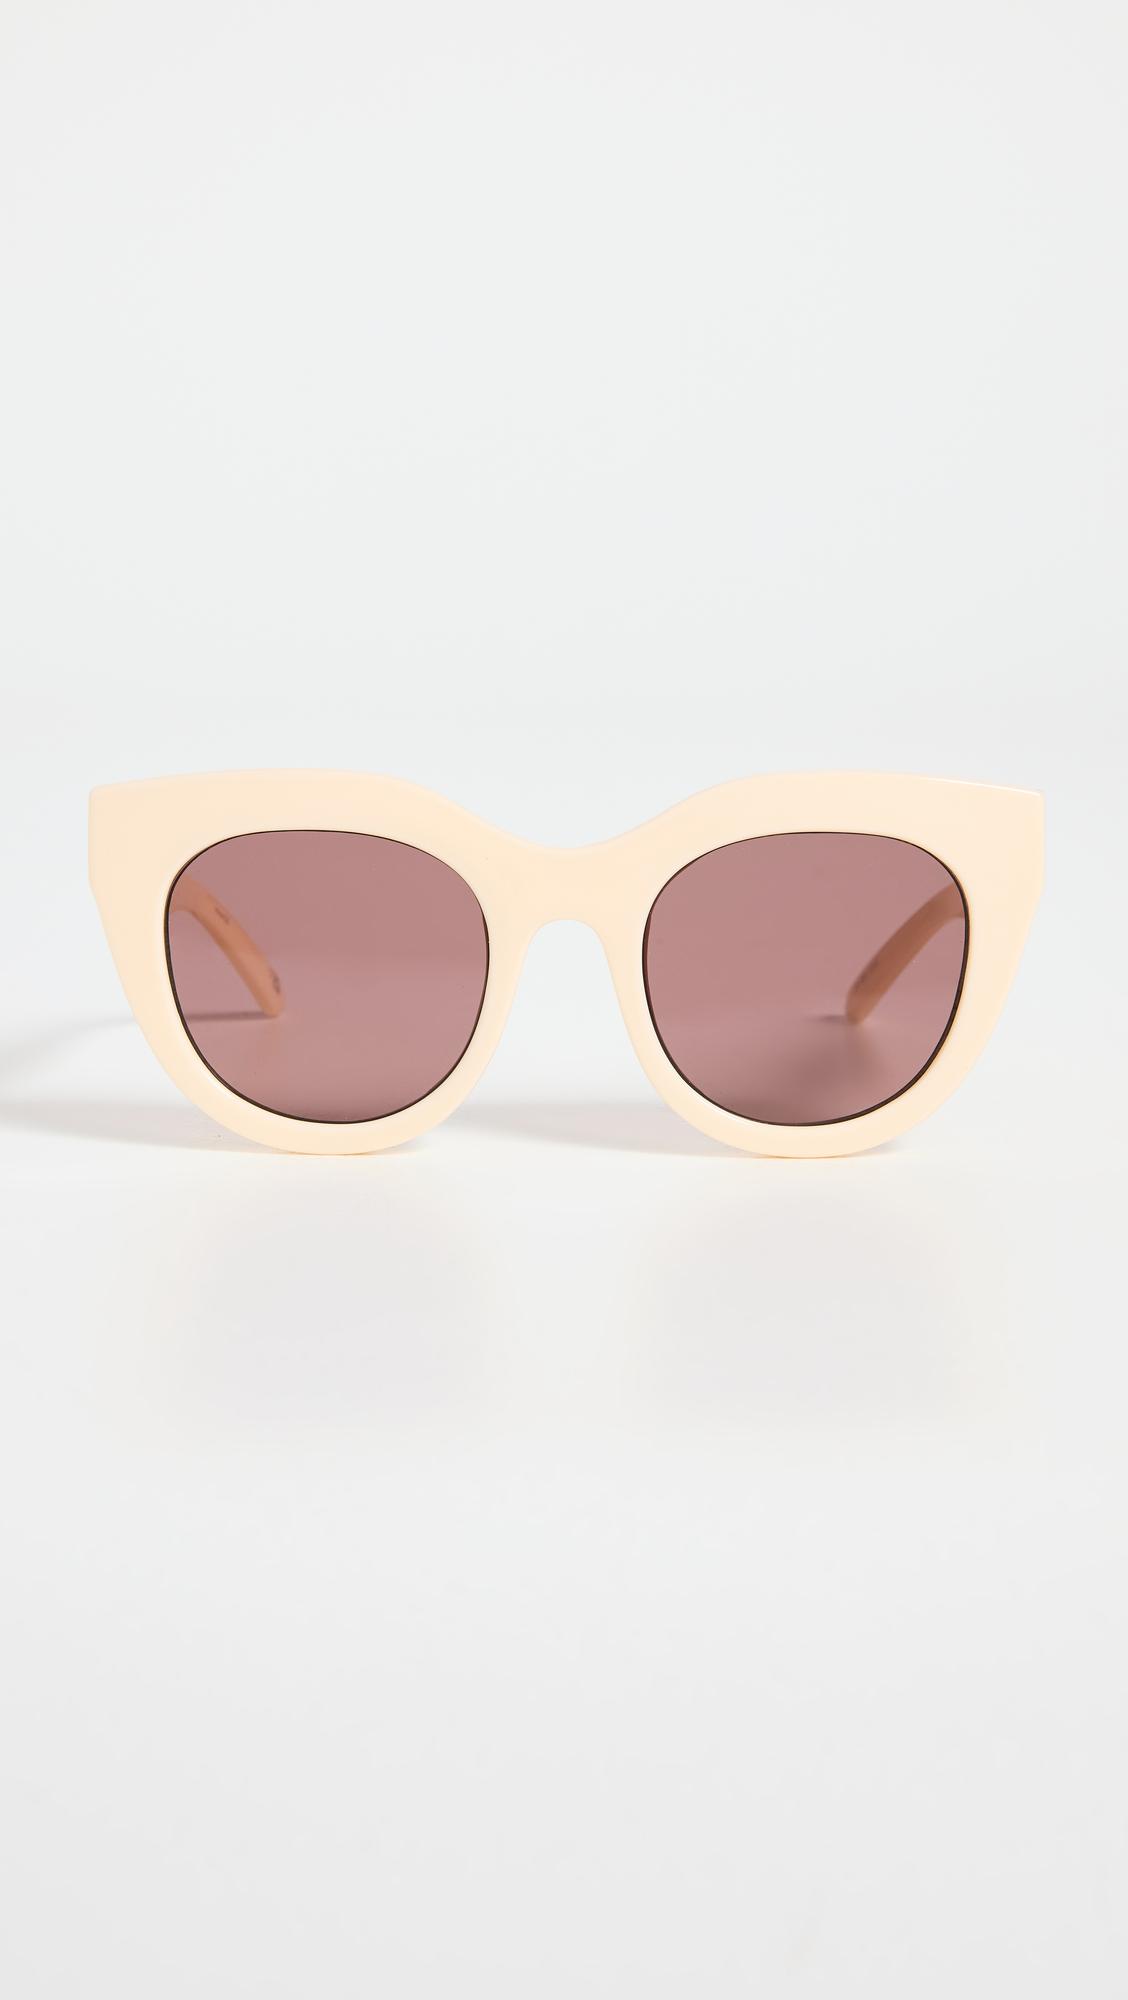 Le Specs Air Heart Sunglasses in Pink | Lyst